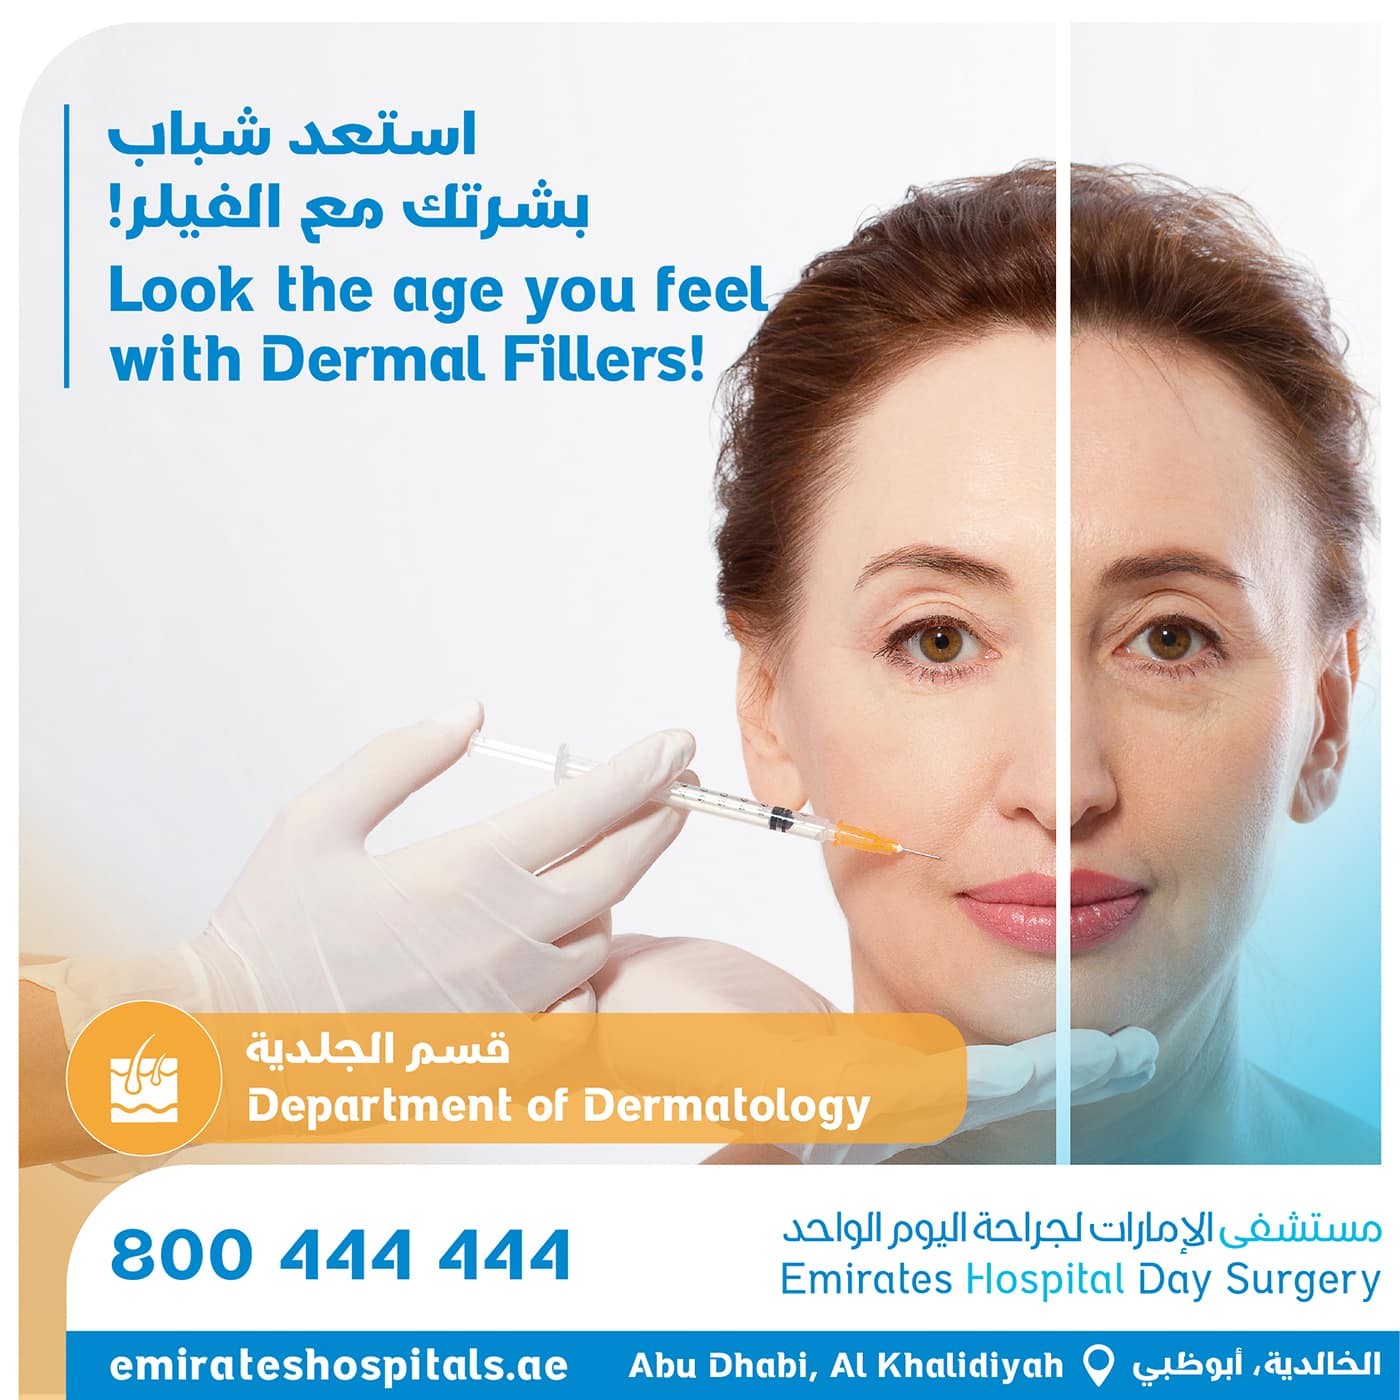 Look the age you feel with Dermal Fillers